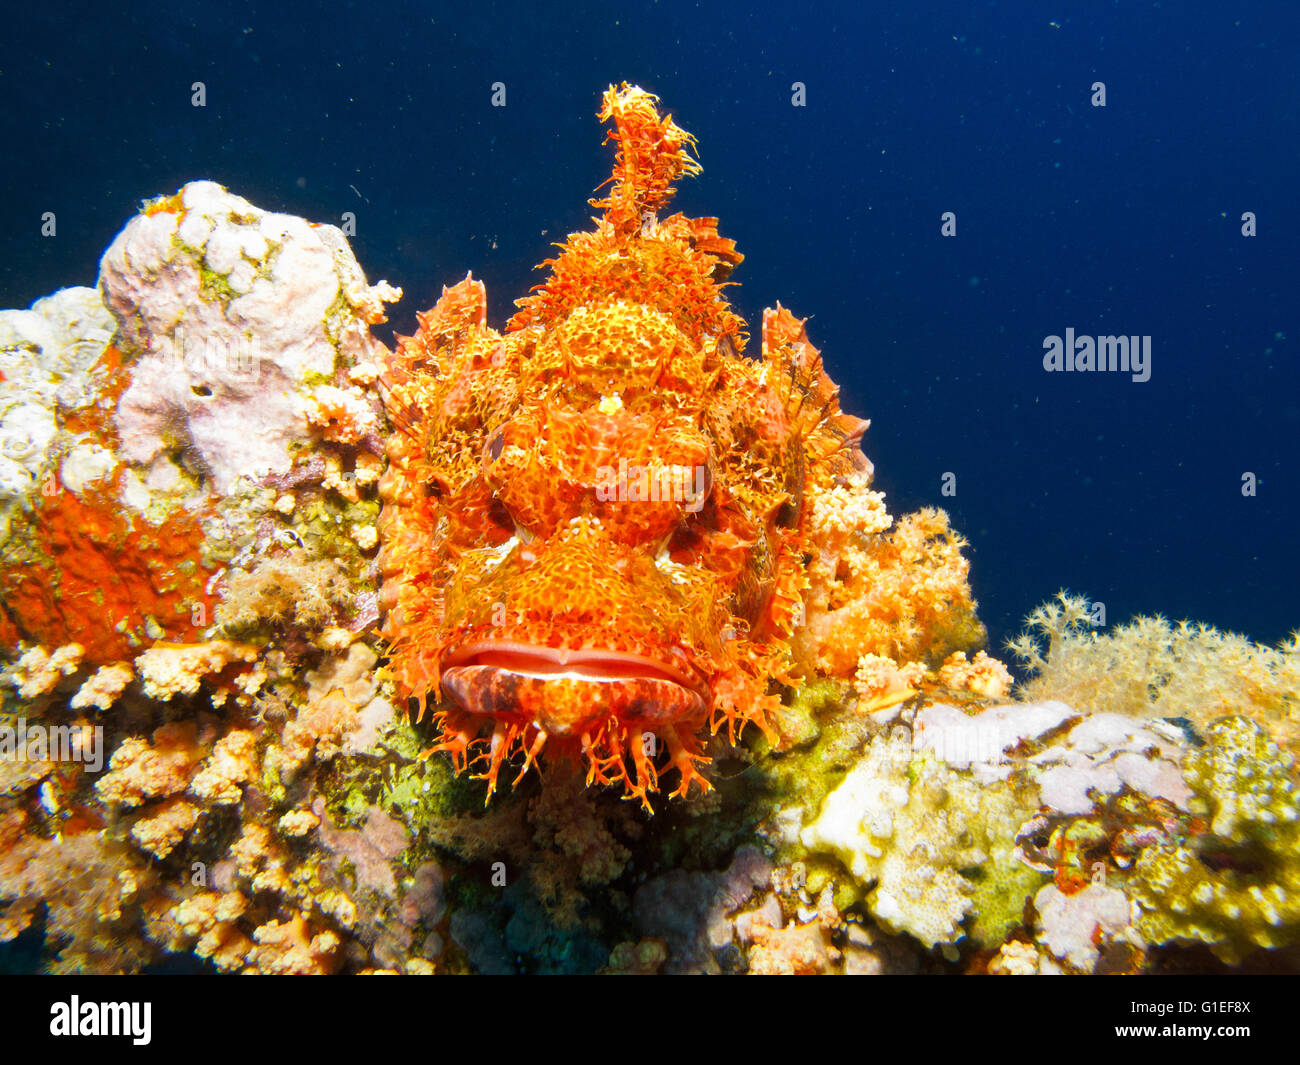 Tassled Scorpionfish waiting for its preys on the rock underwater. Stock Photo